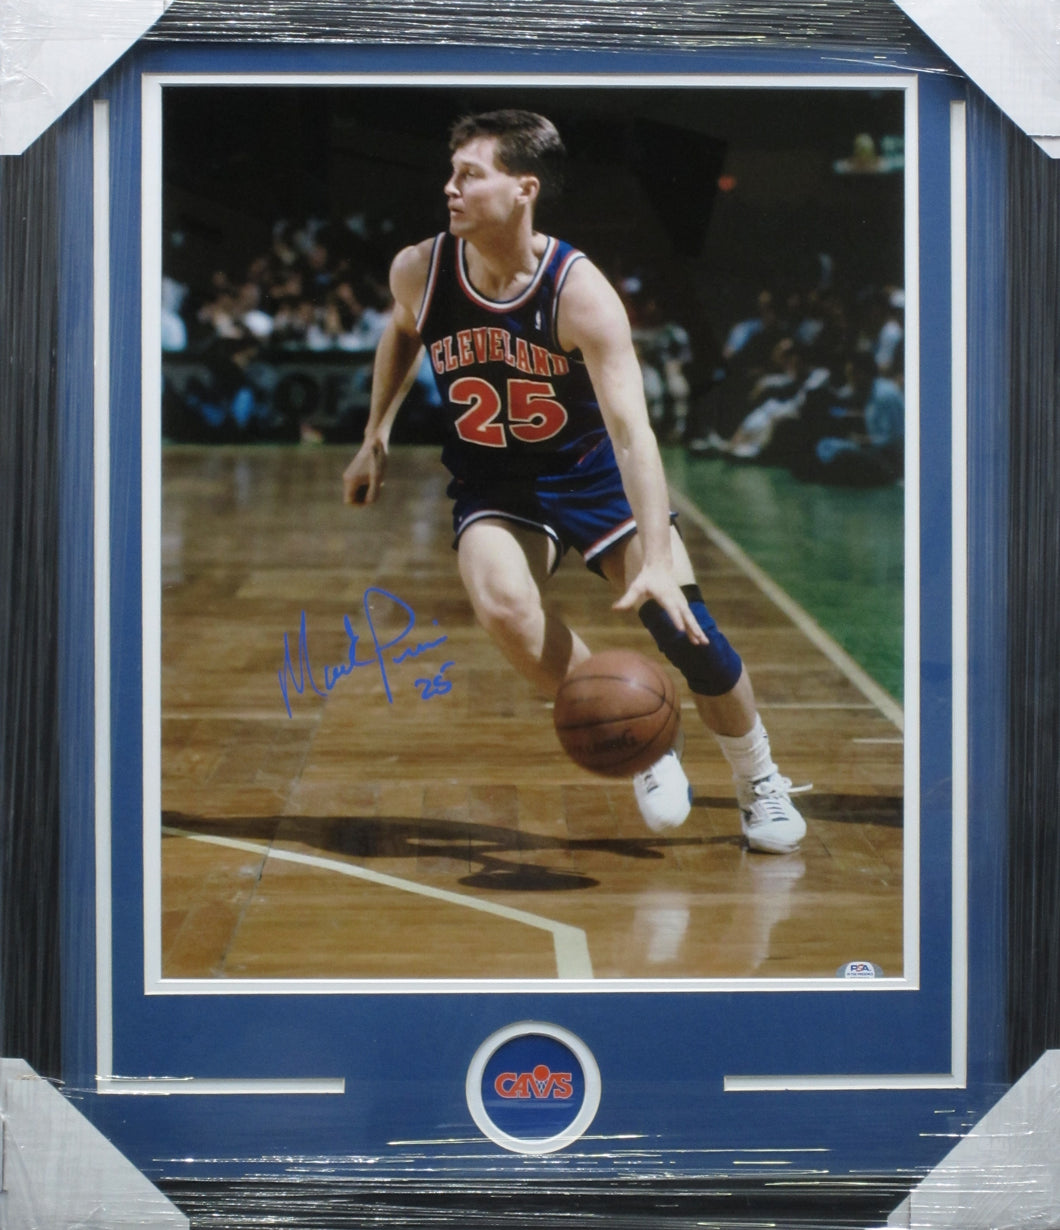 Cleveland Cavaliers Mark Price Signed 16x20 Photo Framed & Matted with PSA COA